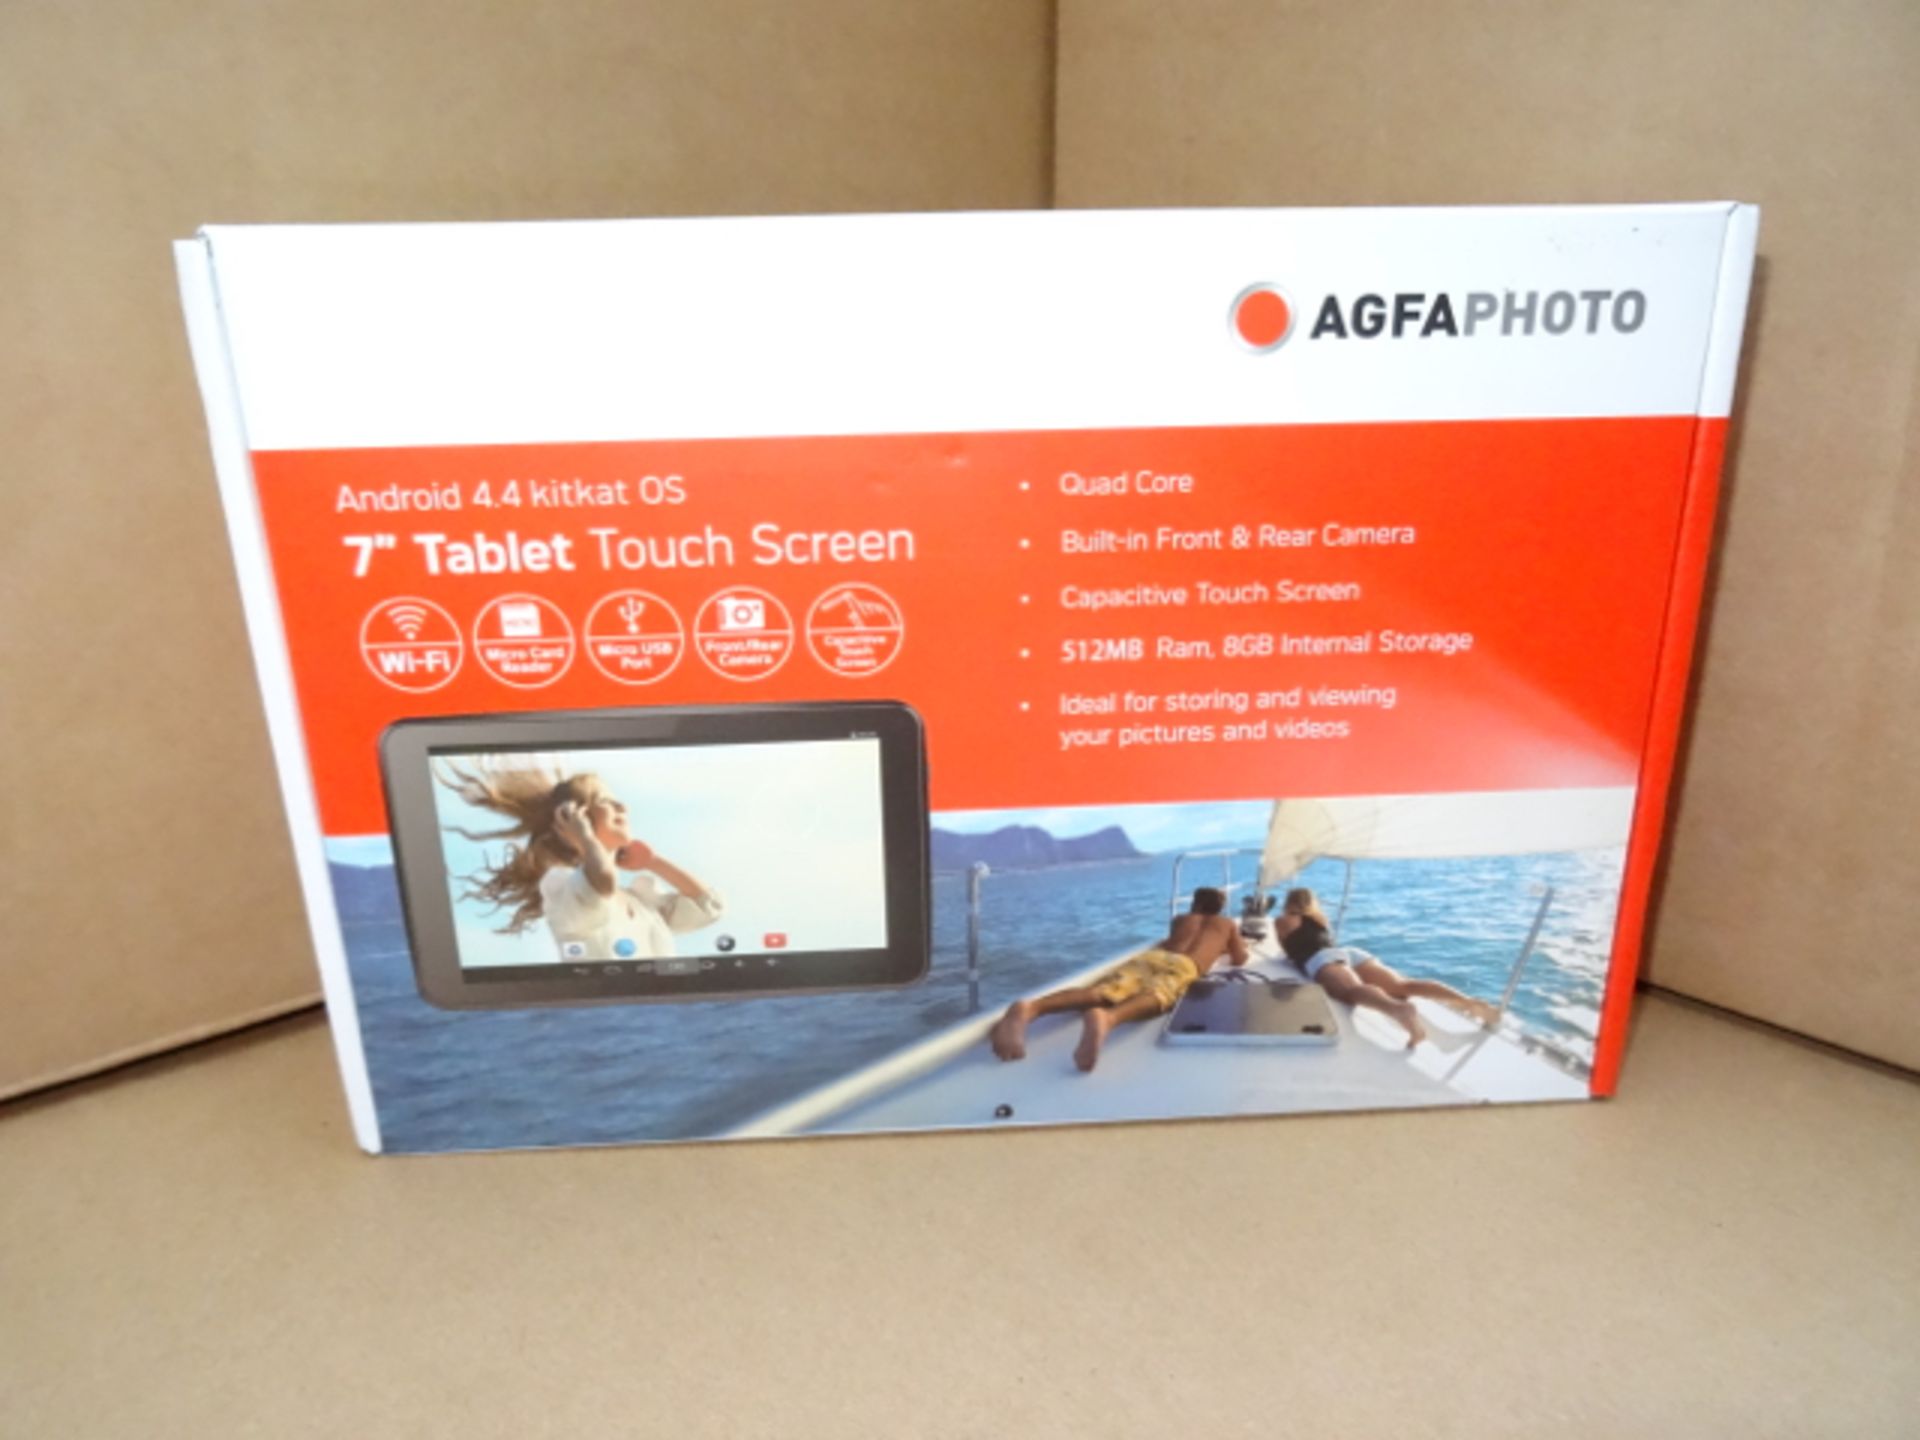 5 x AGFAPHOTO 7 Inch 4.4 KitKat Operating System. Quad Core, Tablets. RRP £99 Each! Total RRP £